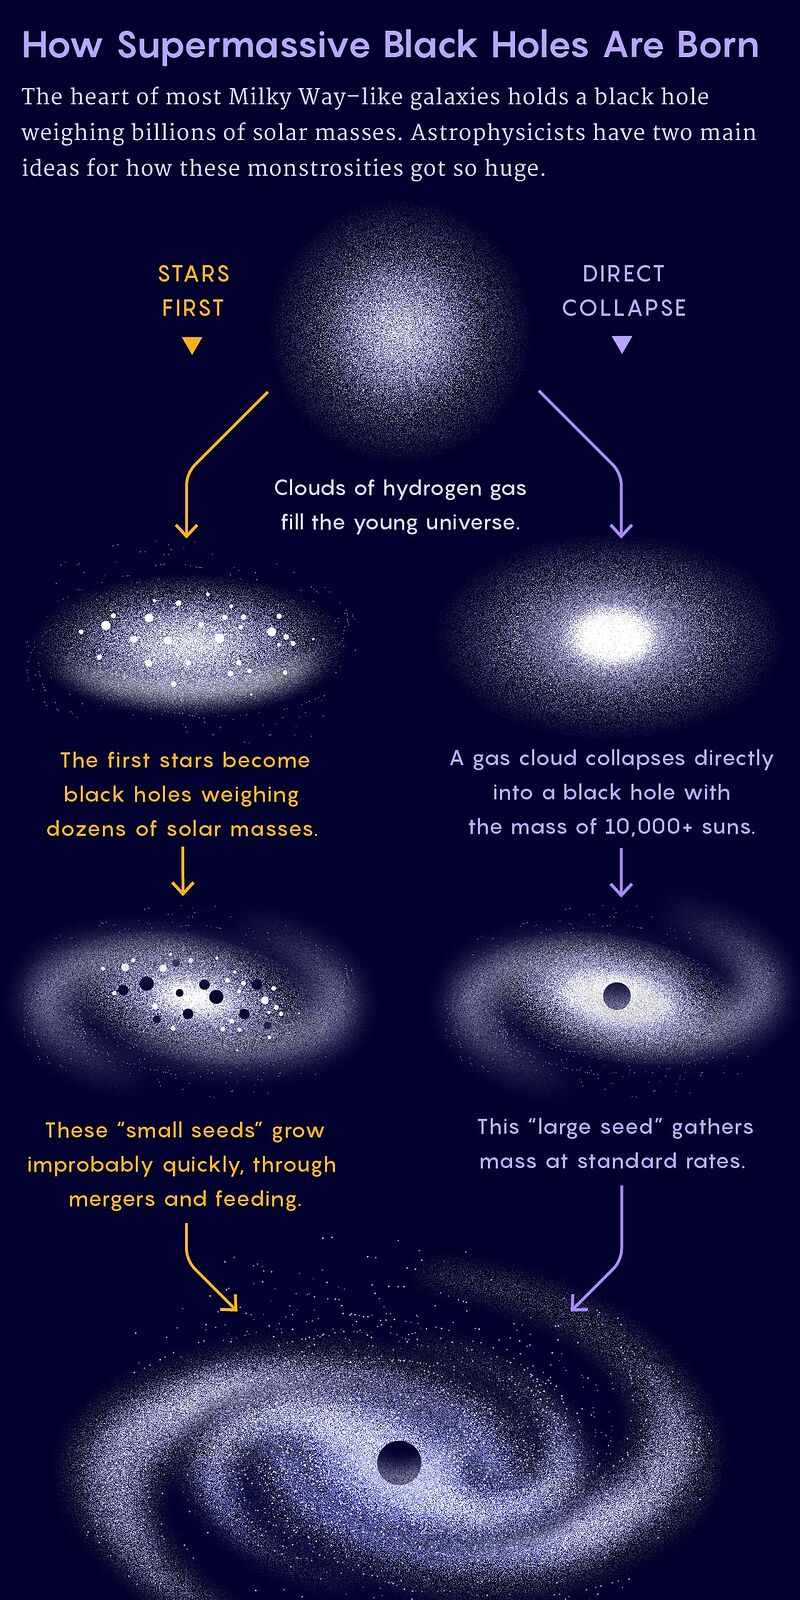 A graphic showing black hole formation